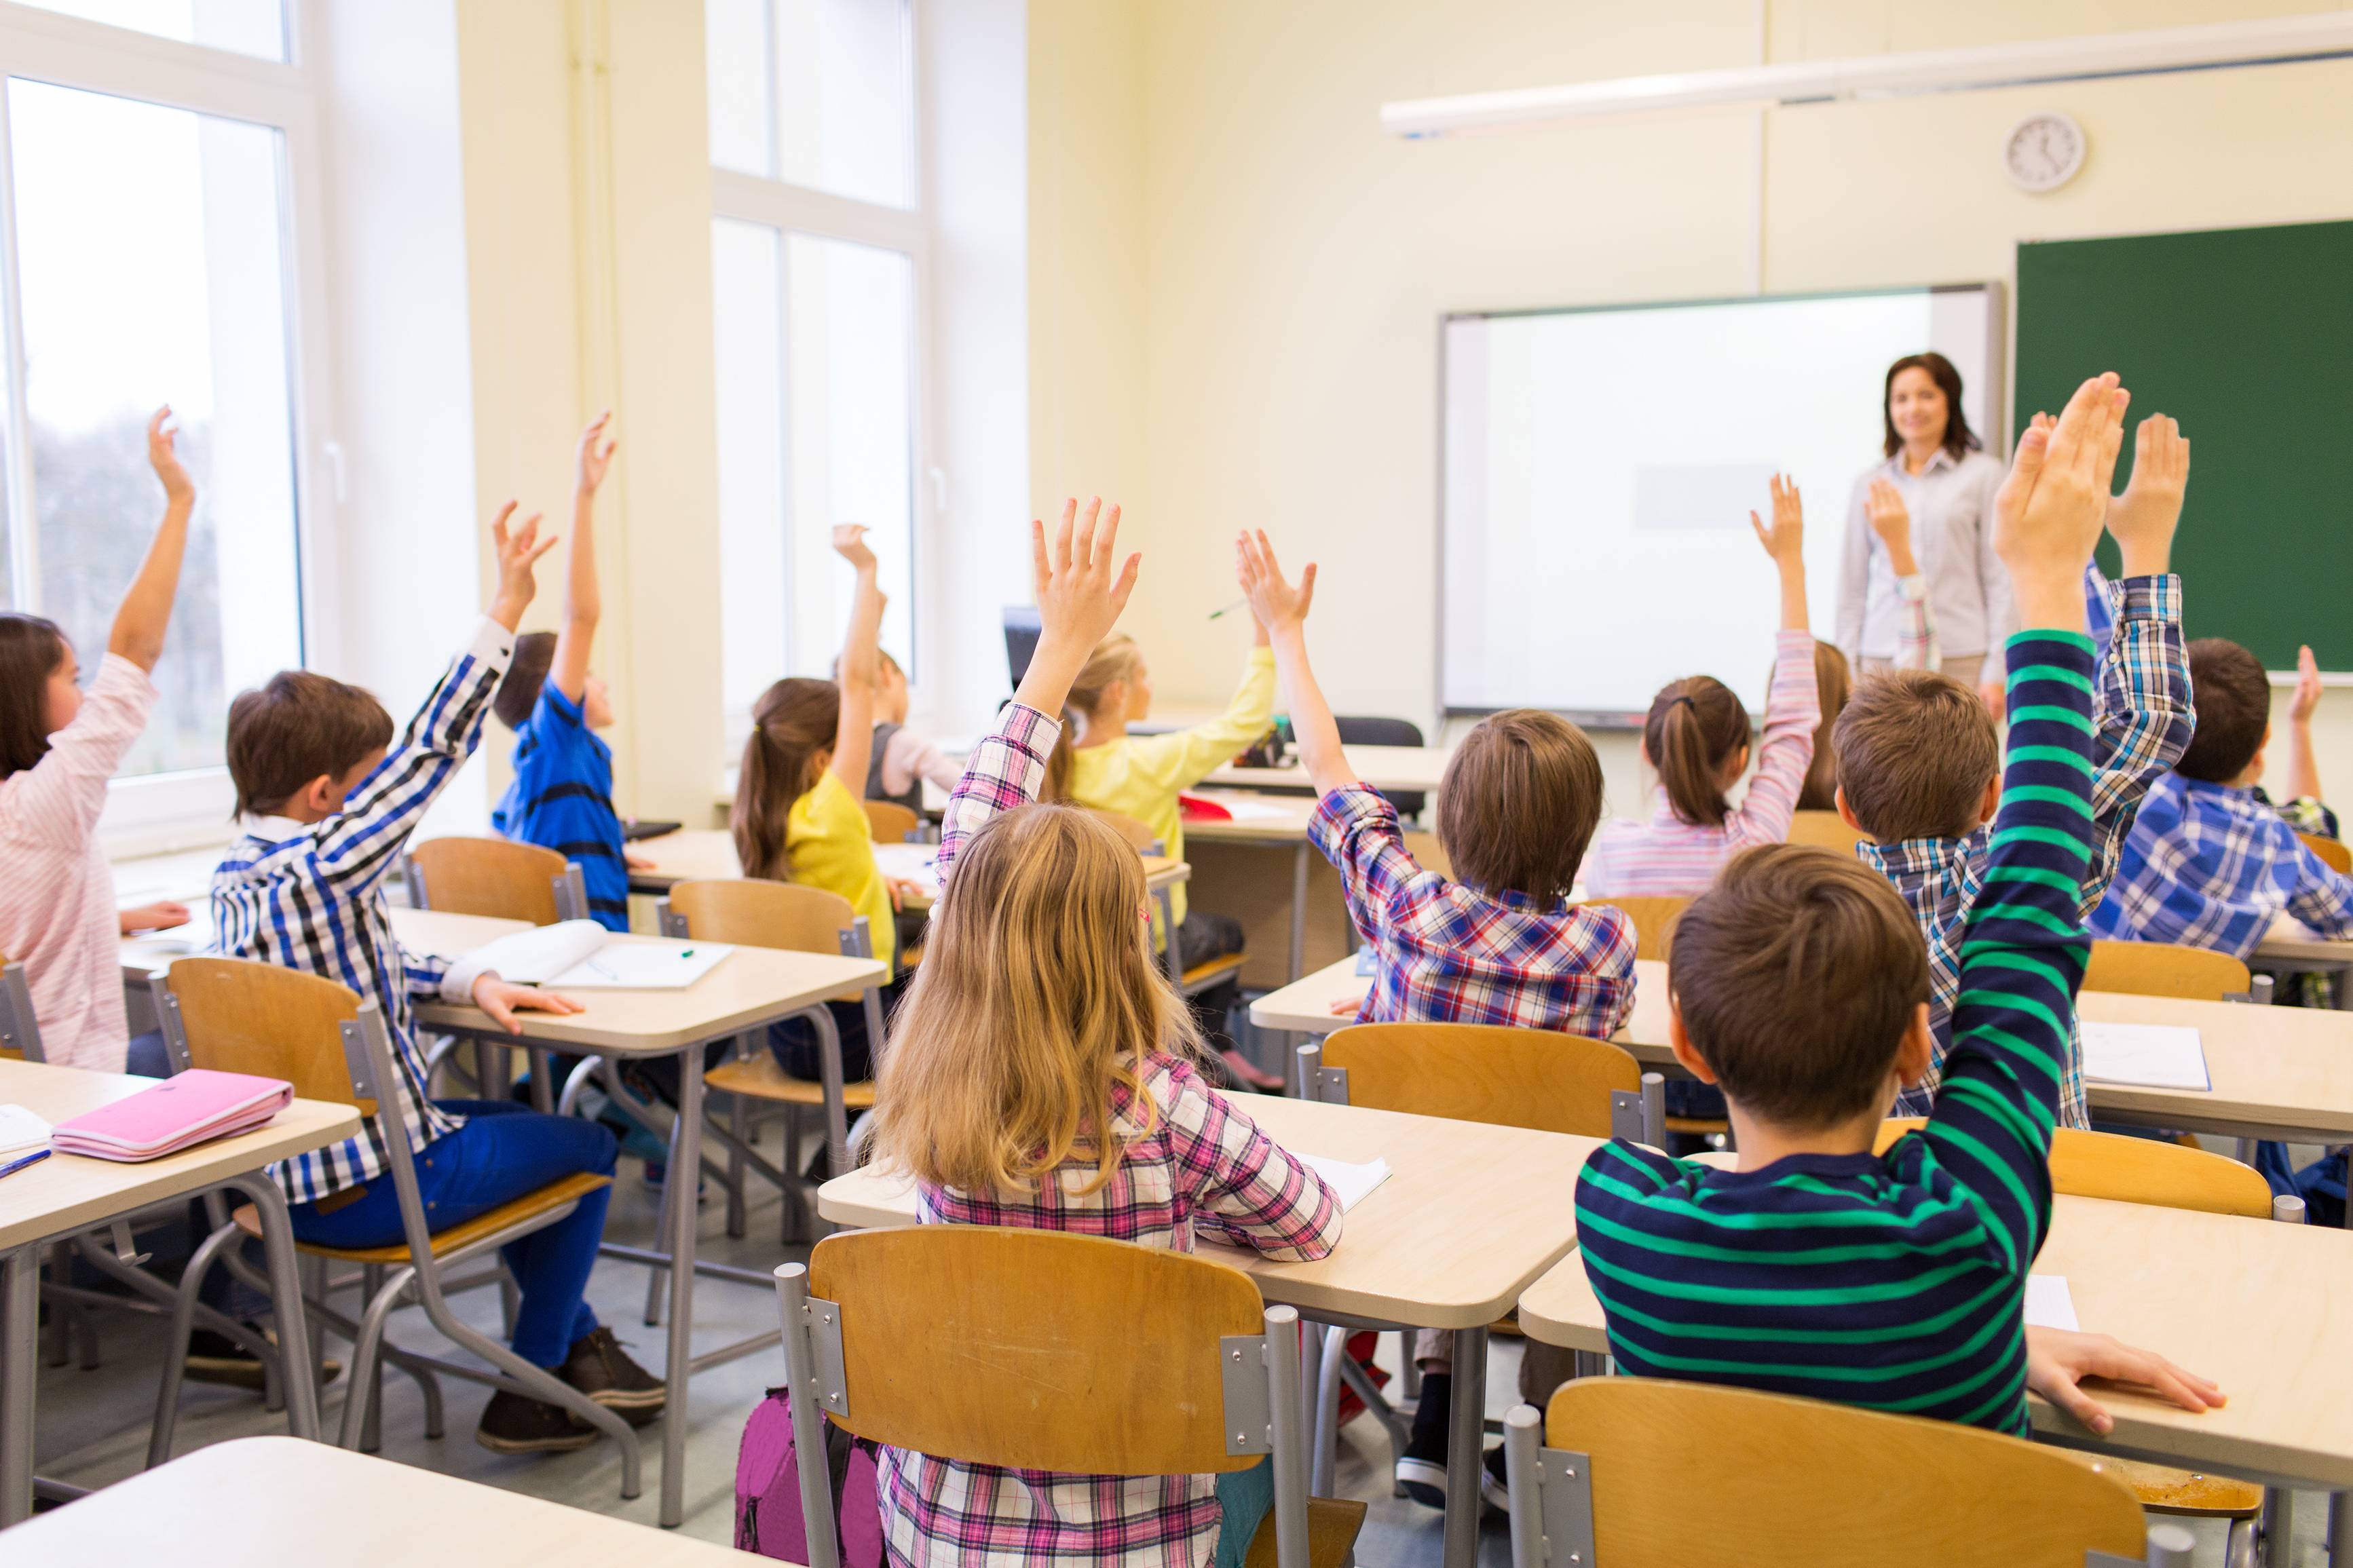 A classroom full of students | Source: Shutterstock